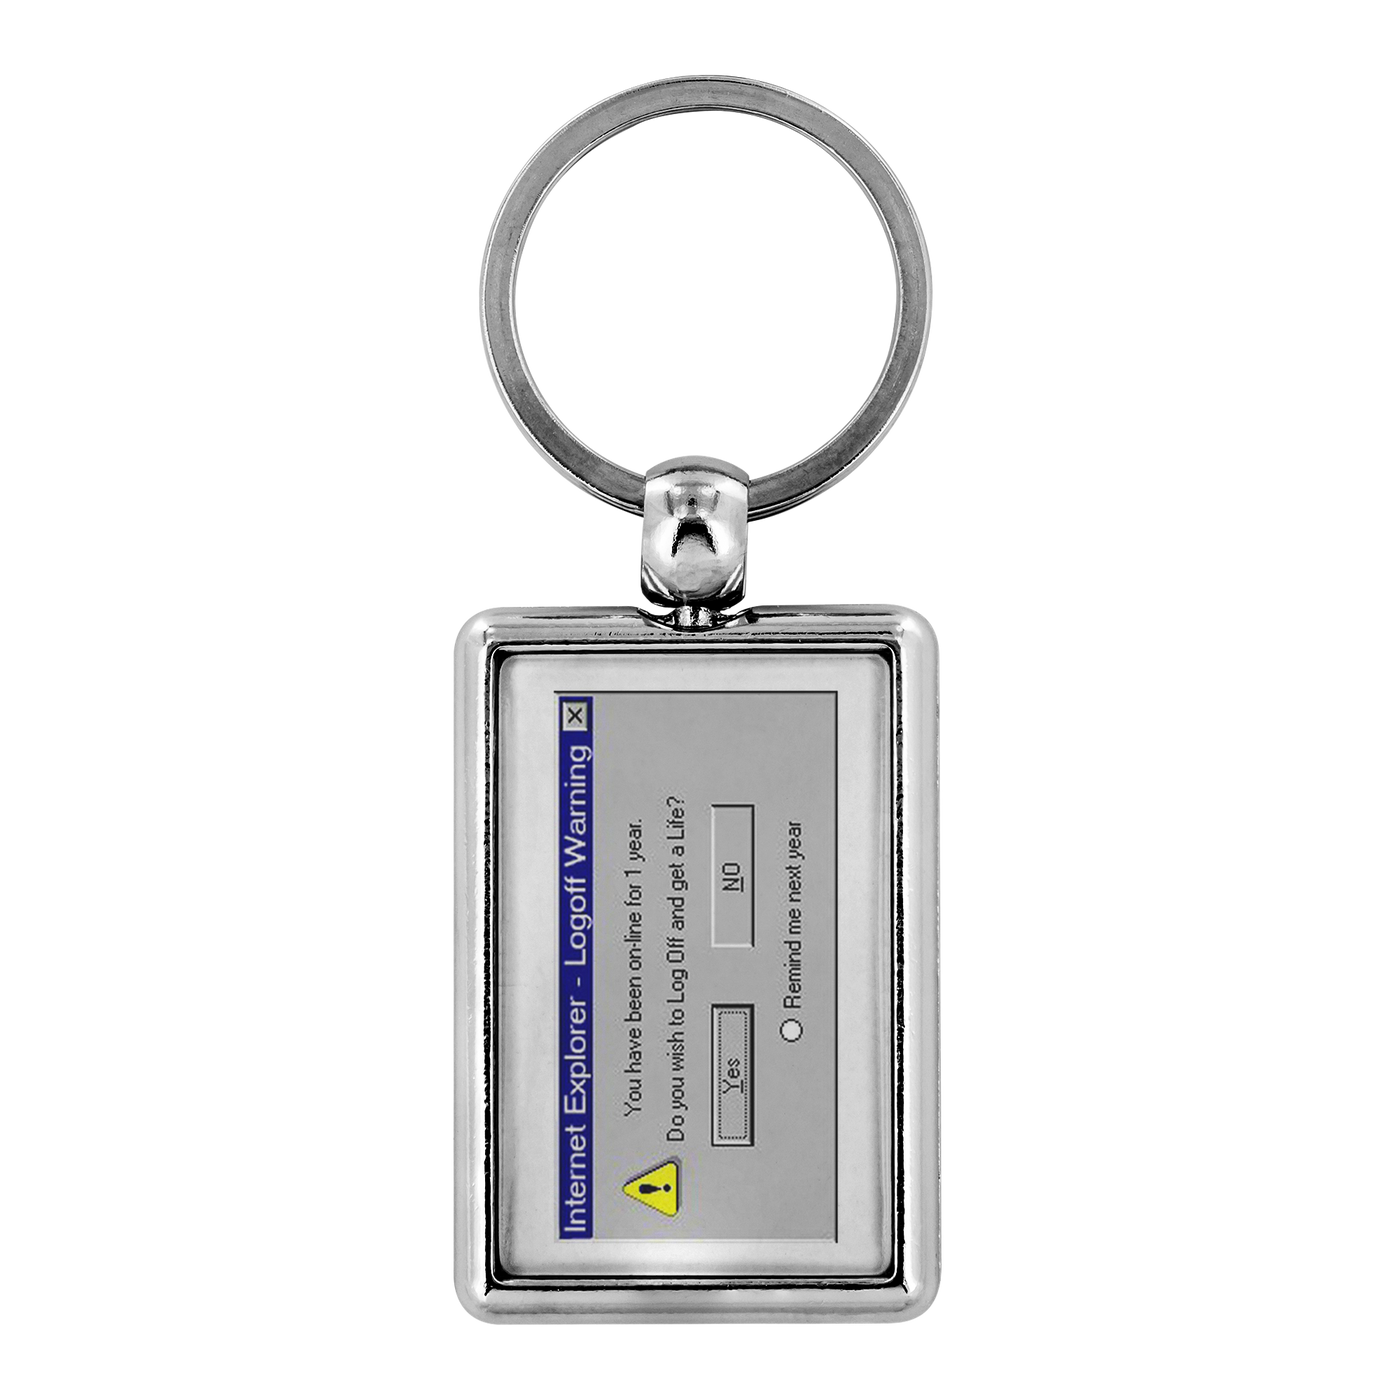 Log off and get a life - Keychains